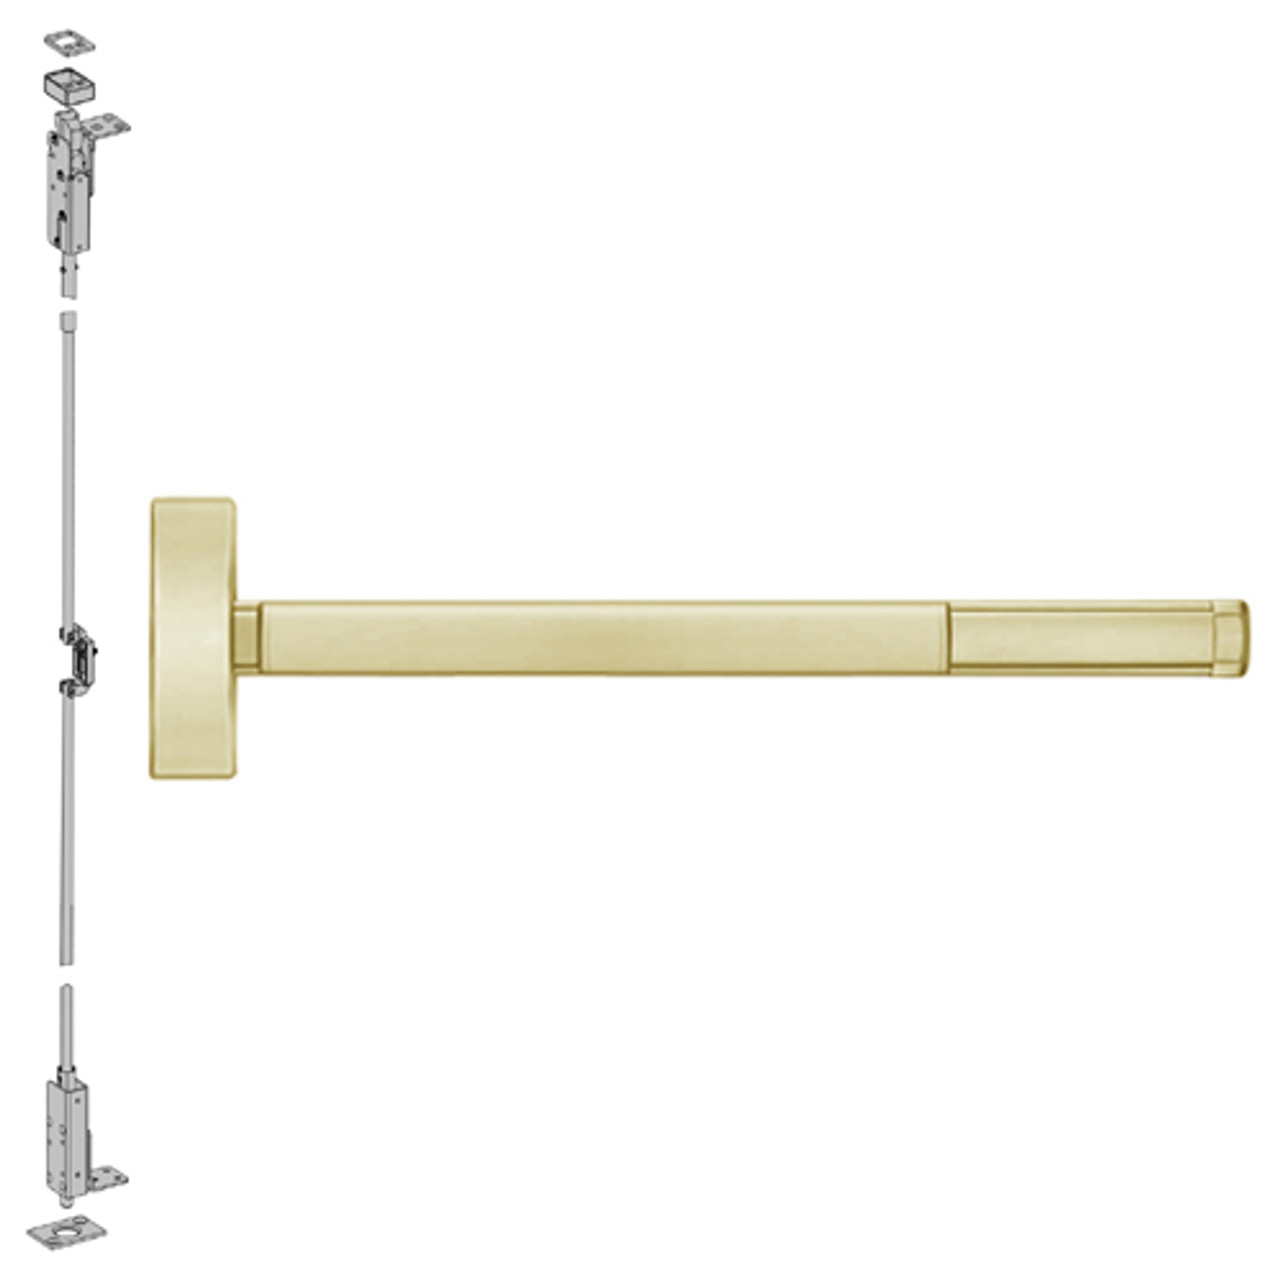 TS2708LBR-606-48 PHI 2700 Series Wood Door Concealed Vertical Exit Device with Touchbar Monitoring Switch Prepped for Key Controls Lever-Knob in Satin Brass Finish